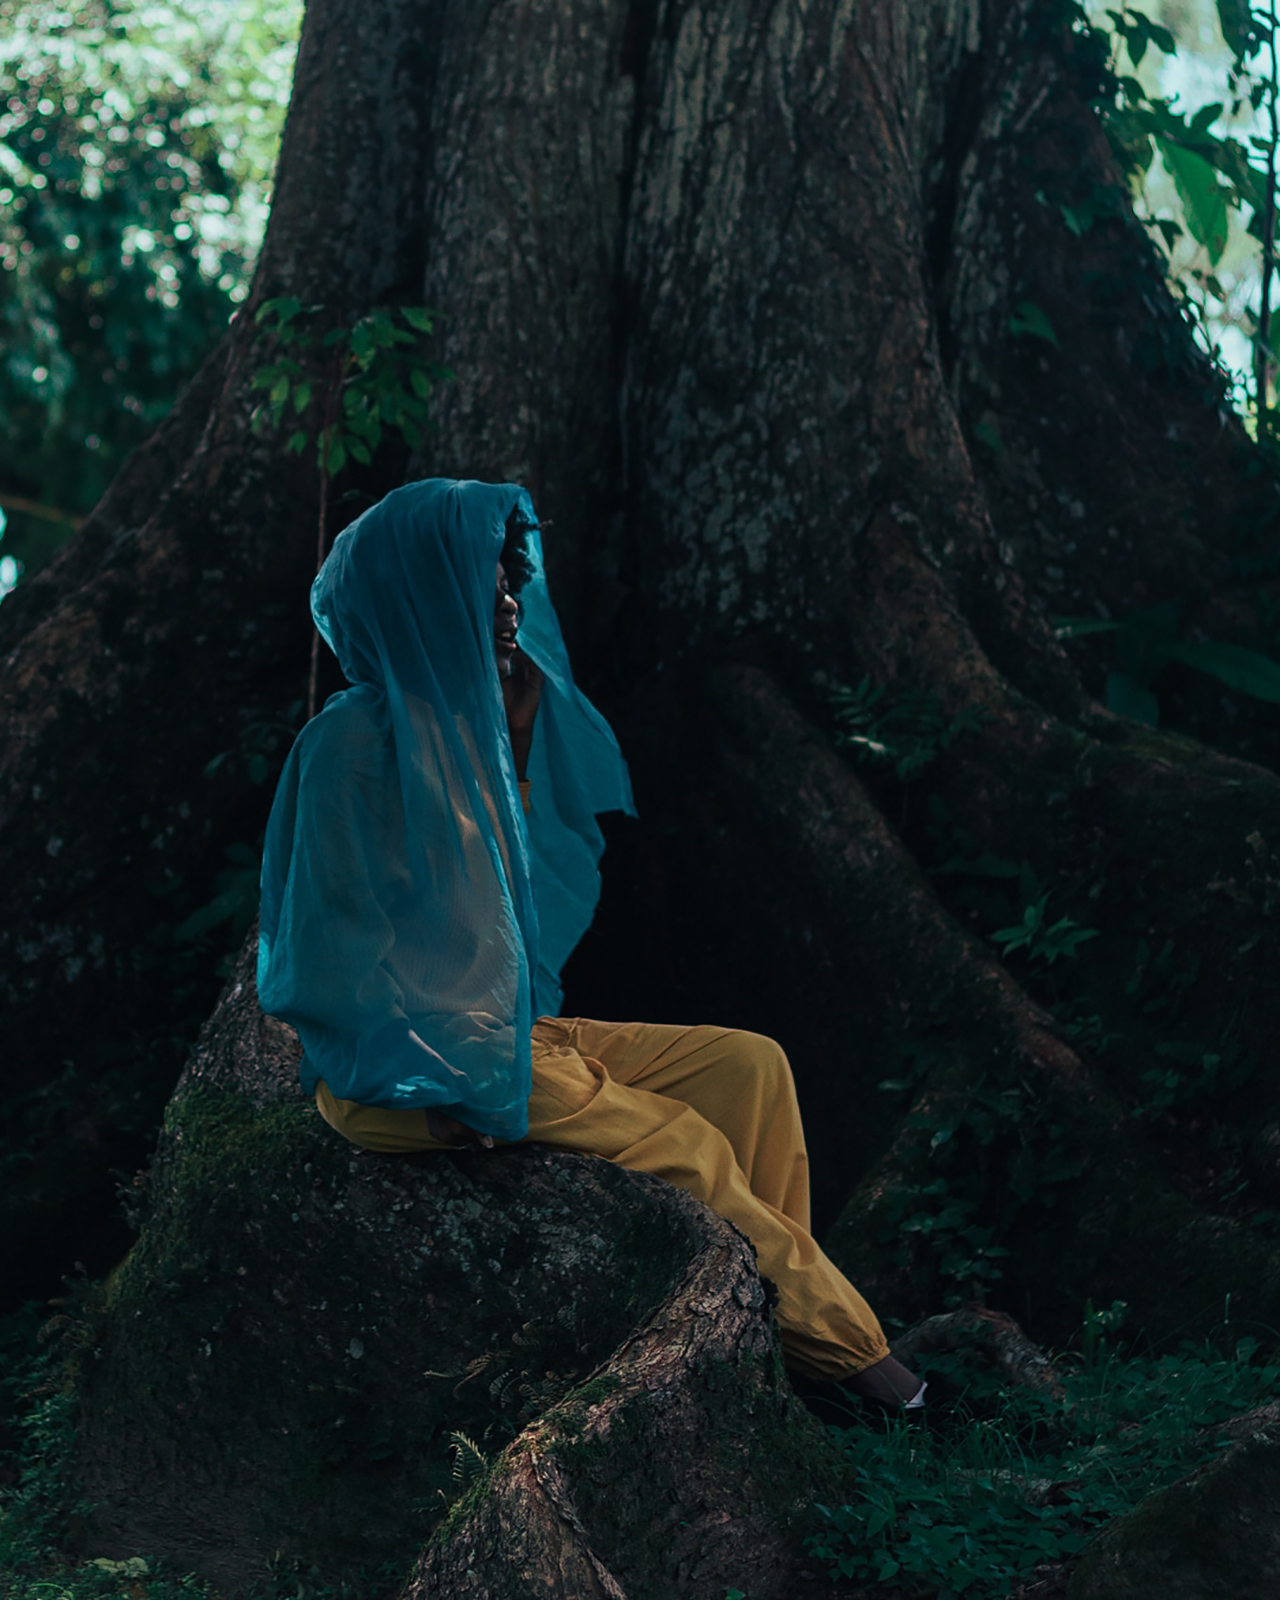 photo of woman, the contributor, sitting on tree stup with blue scarf around face and head